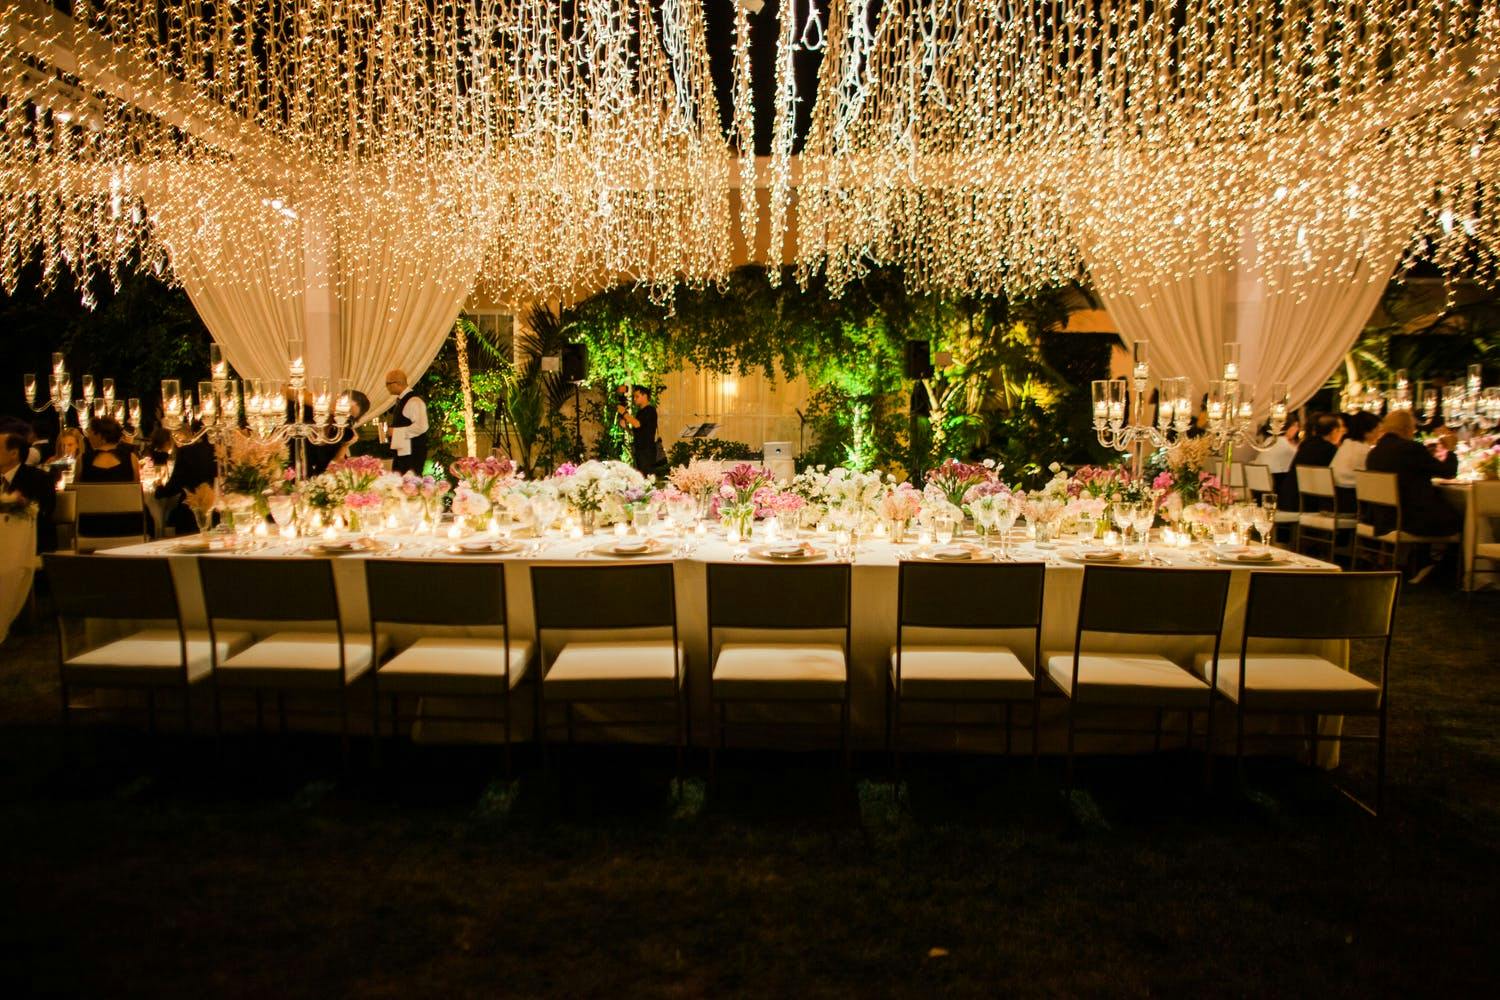 Evening wedding with suspended string lights over tablescap | PartySlate